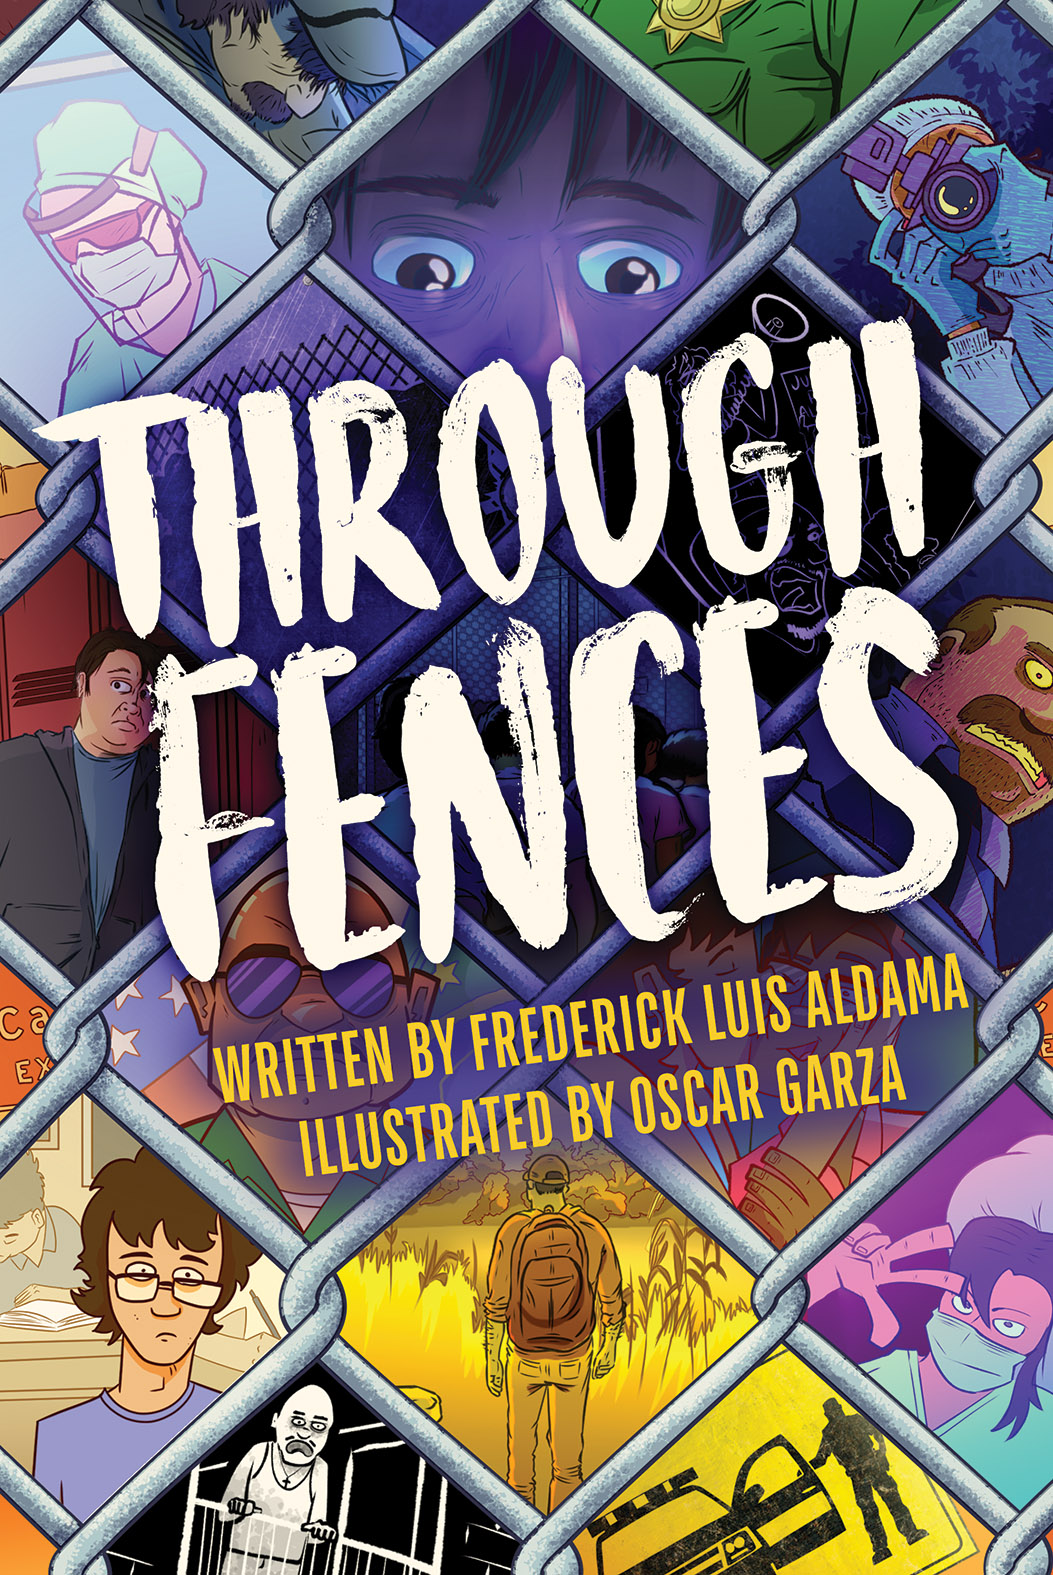 Front cover of Through Fences, Written by Frederick Luis Aldama and Illustrated by Oscar Garza, featuring images of several characters from the interior peeking through openings in a chain link fence.